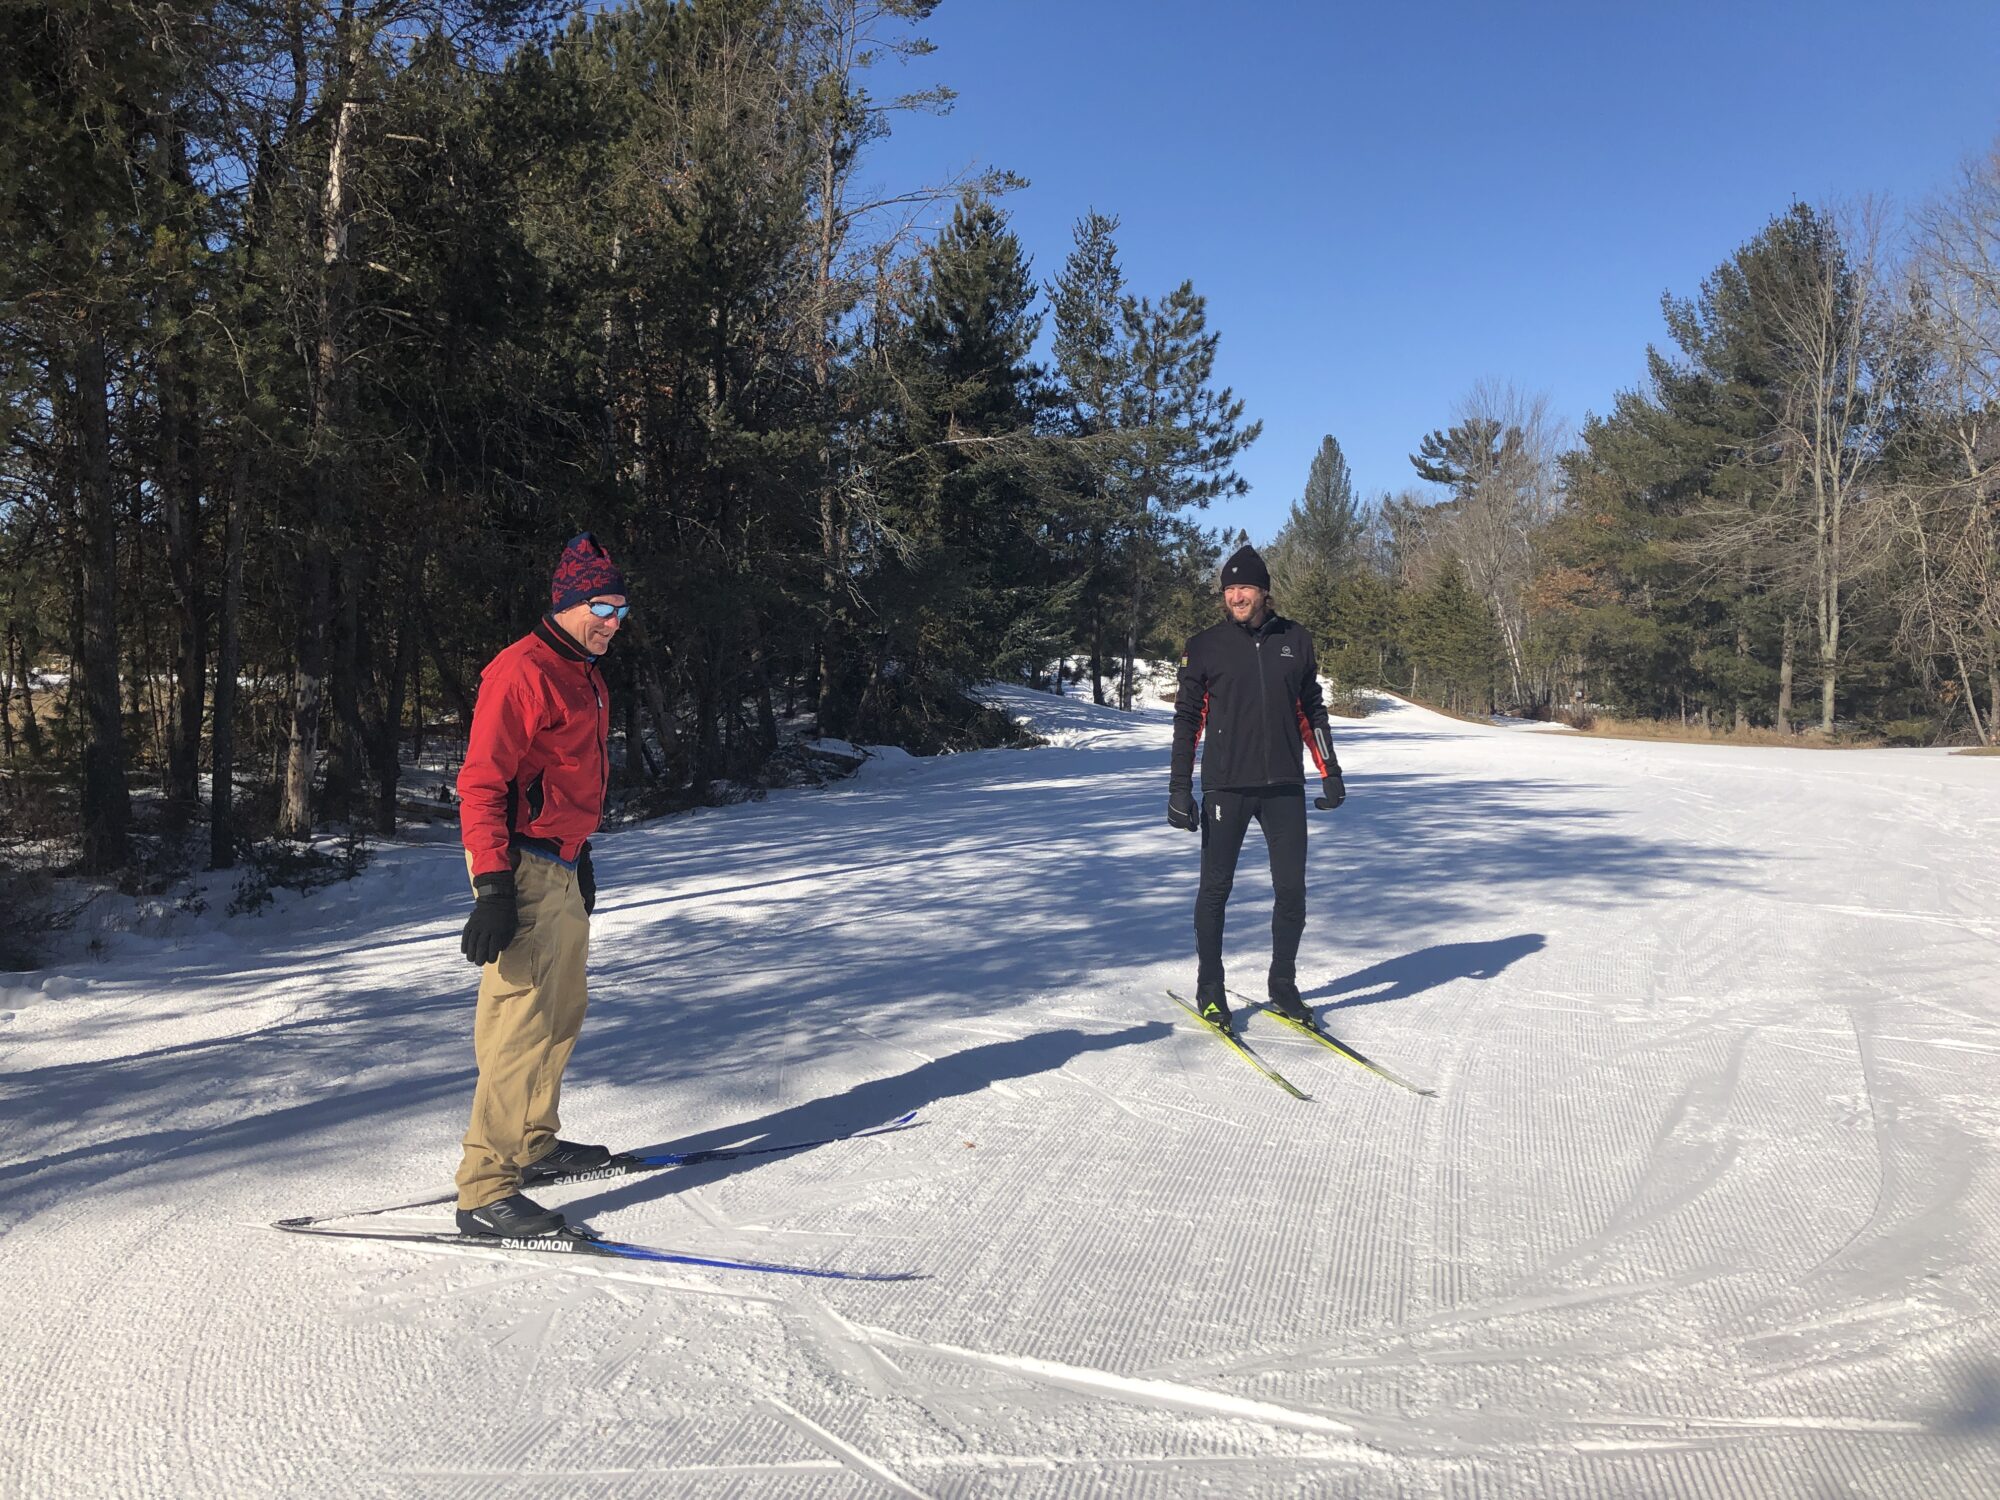 Take a cross country ski lesson at Cross Country Ski Headquarters!